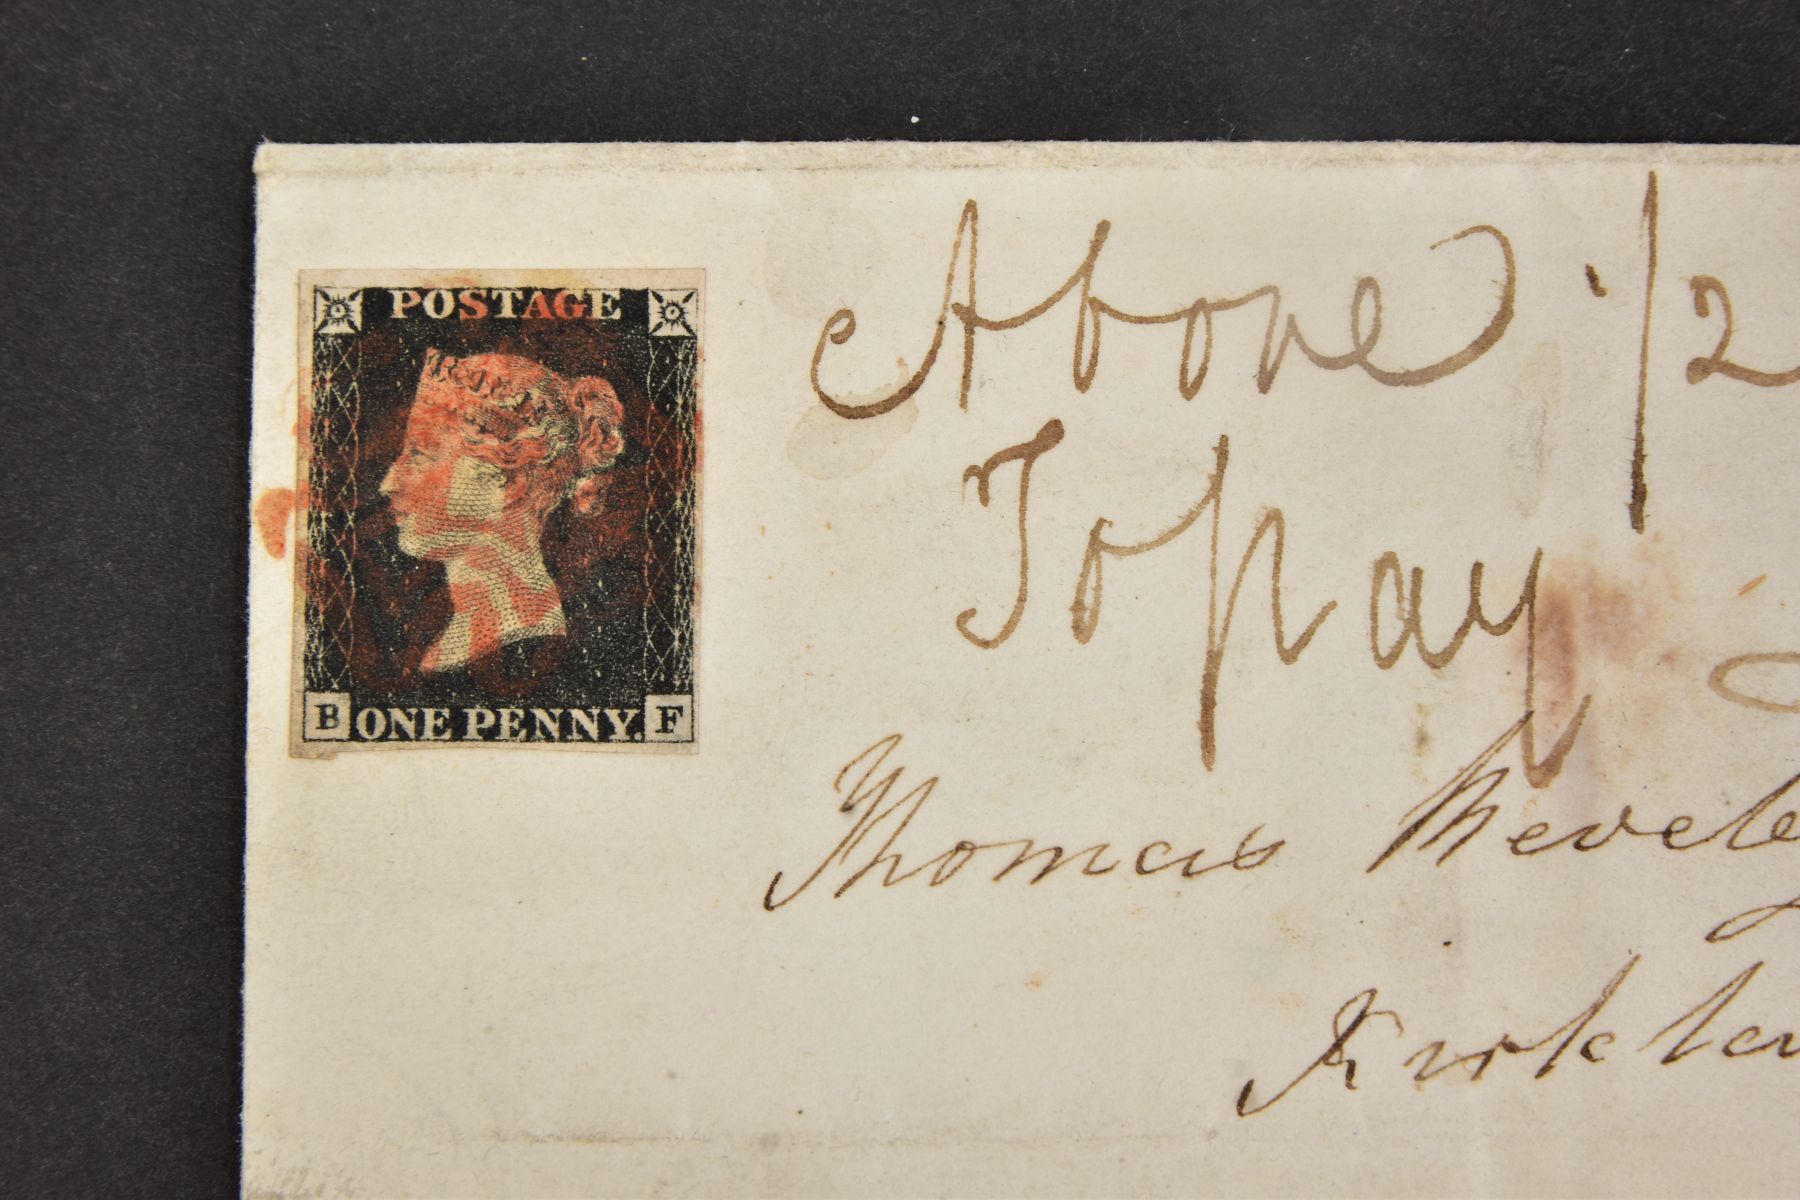 GB 1840 PENNY BLACK on cover plate 4 BF affixed top left, contrary to regulations with M/S - Image 2 of 3